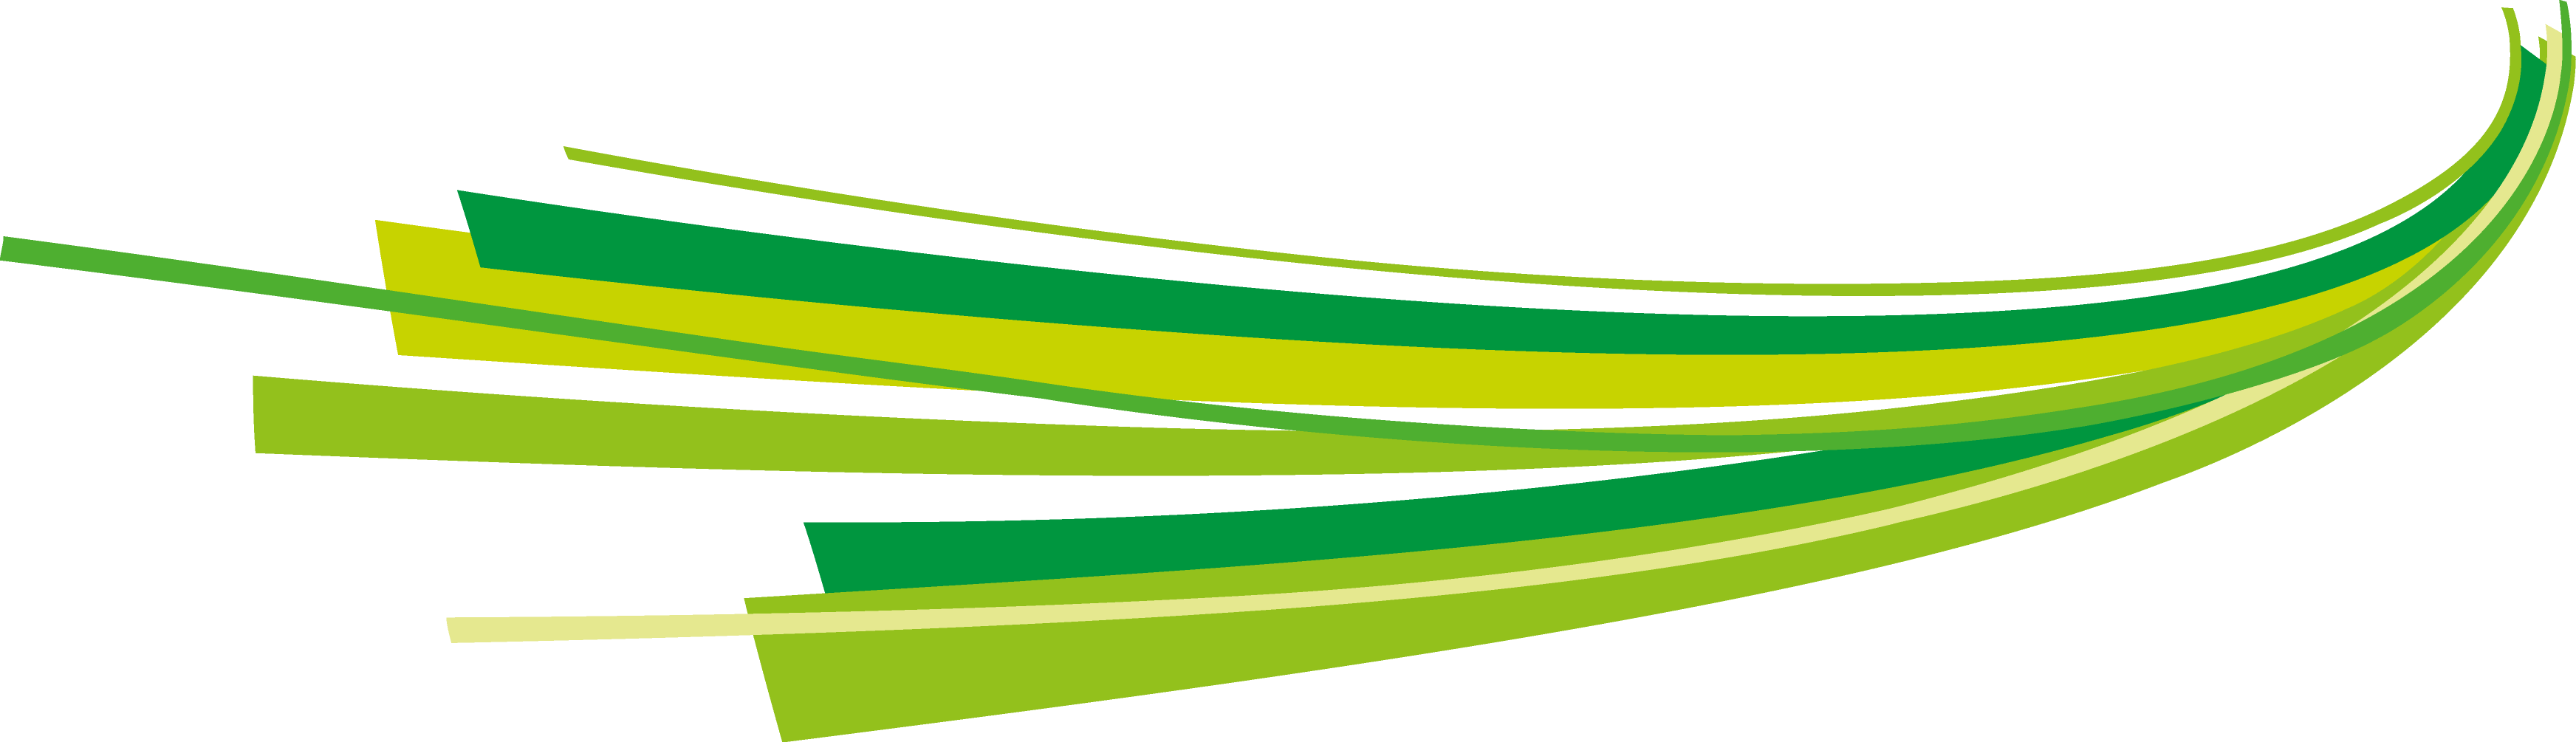 Swoosh Belgian Road Safety Institute - Green And Yellow Swoosh (3488x1005)